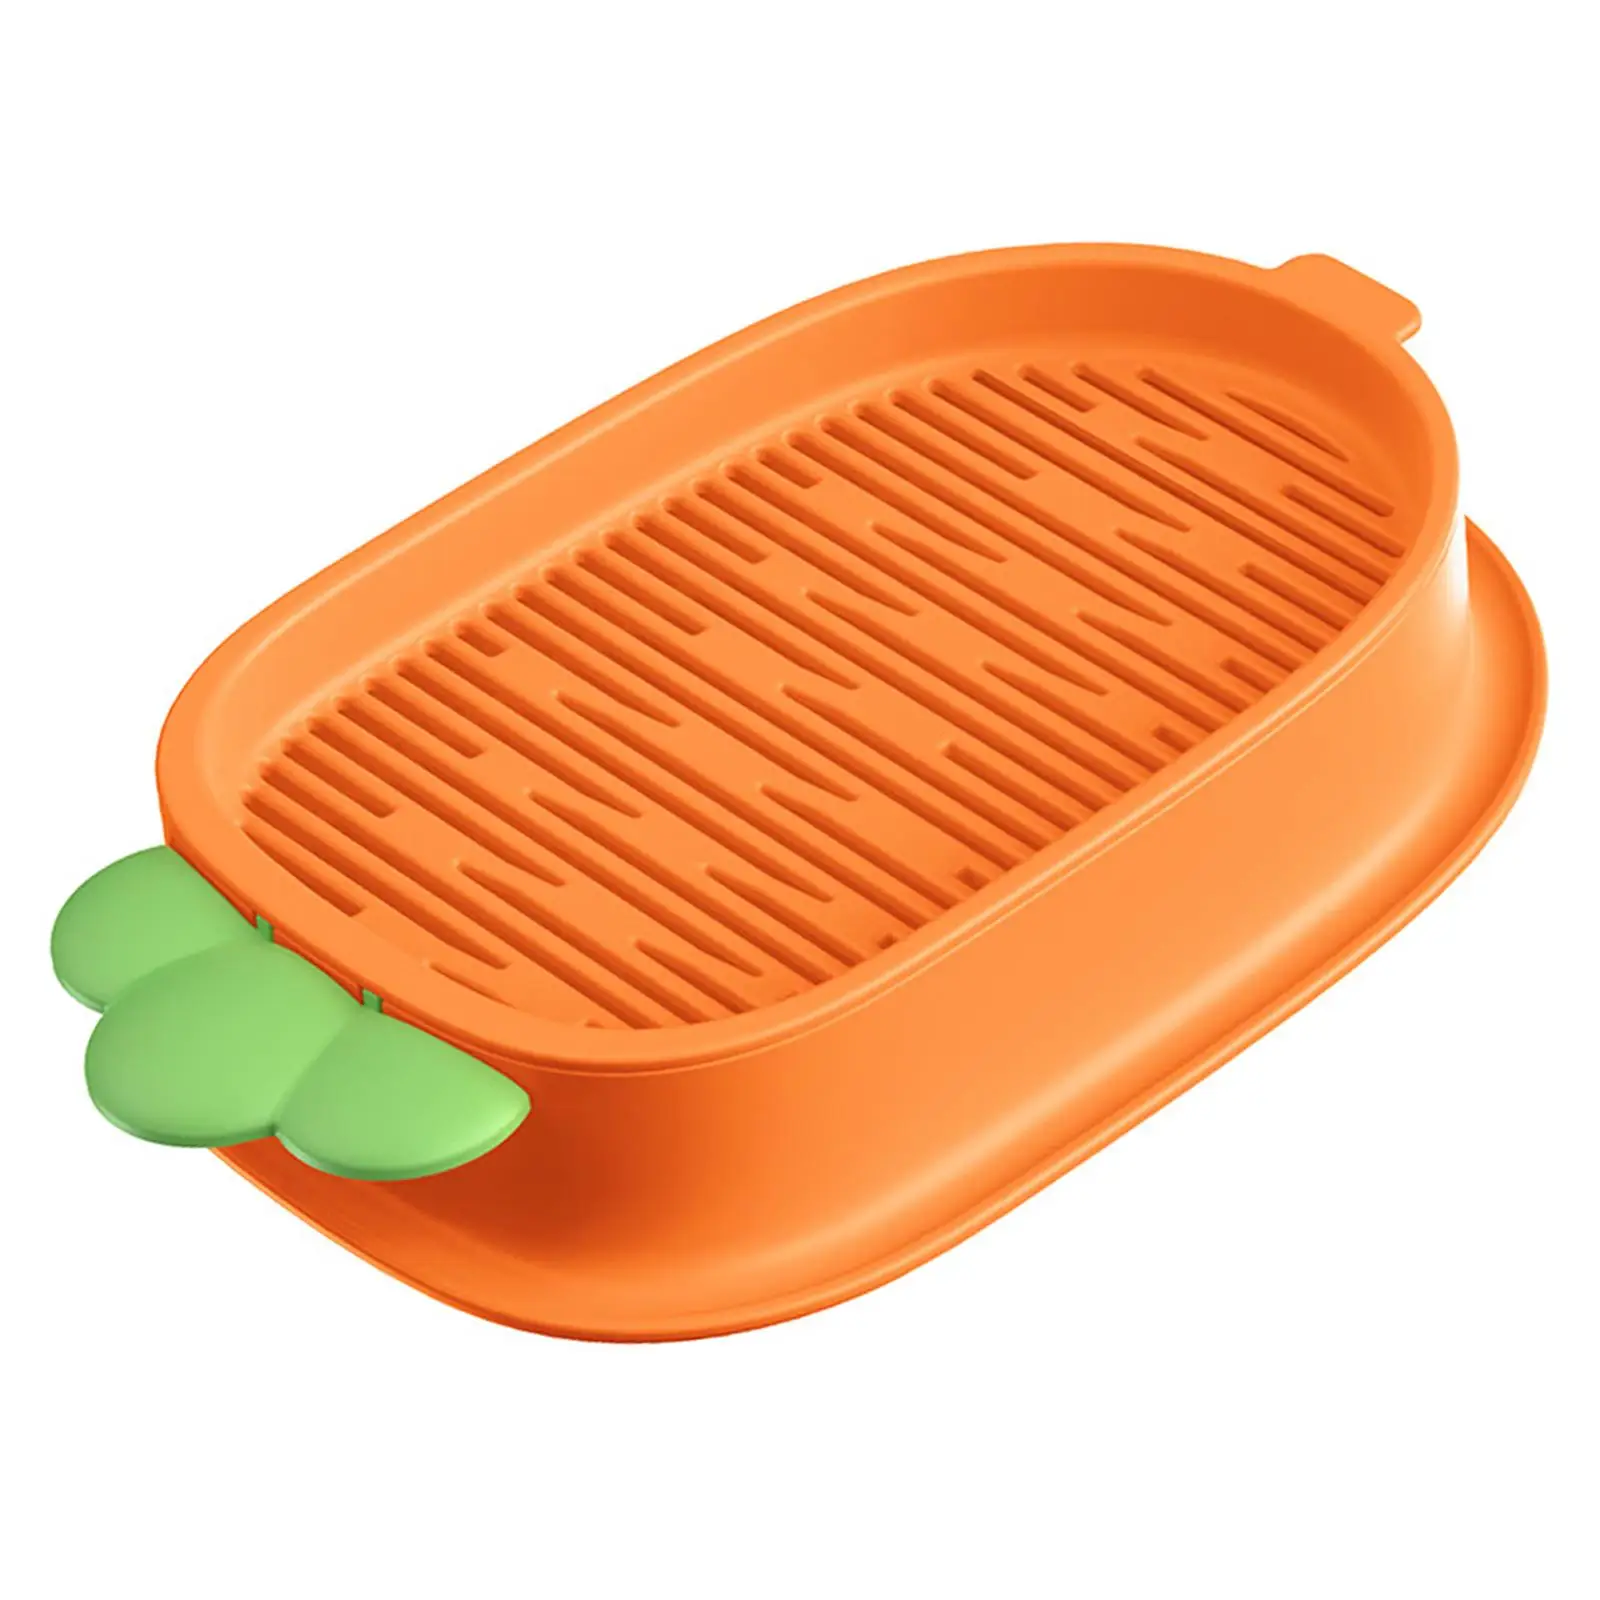 Sprouter Tray Hydroponic Cat Grass Box Wheatgrass Bean Sprouts Cat Snack Tray Soil Free Planter Tray for Seedling Planting